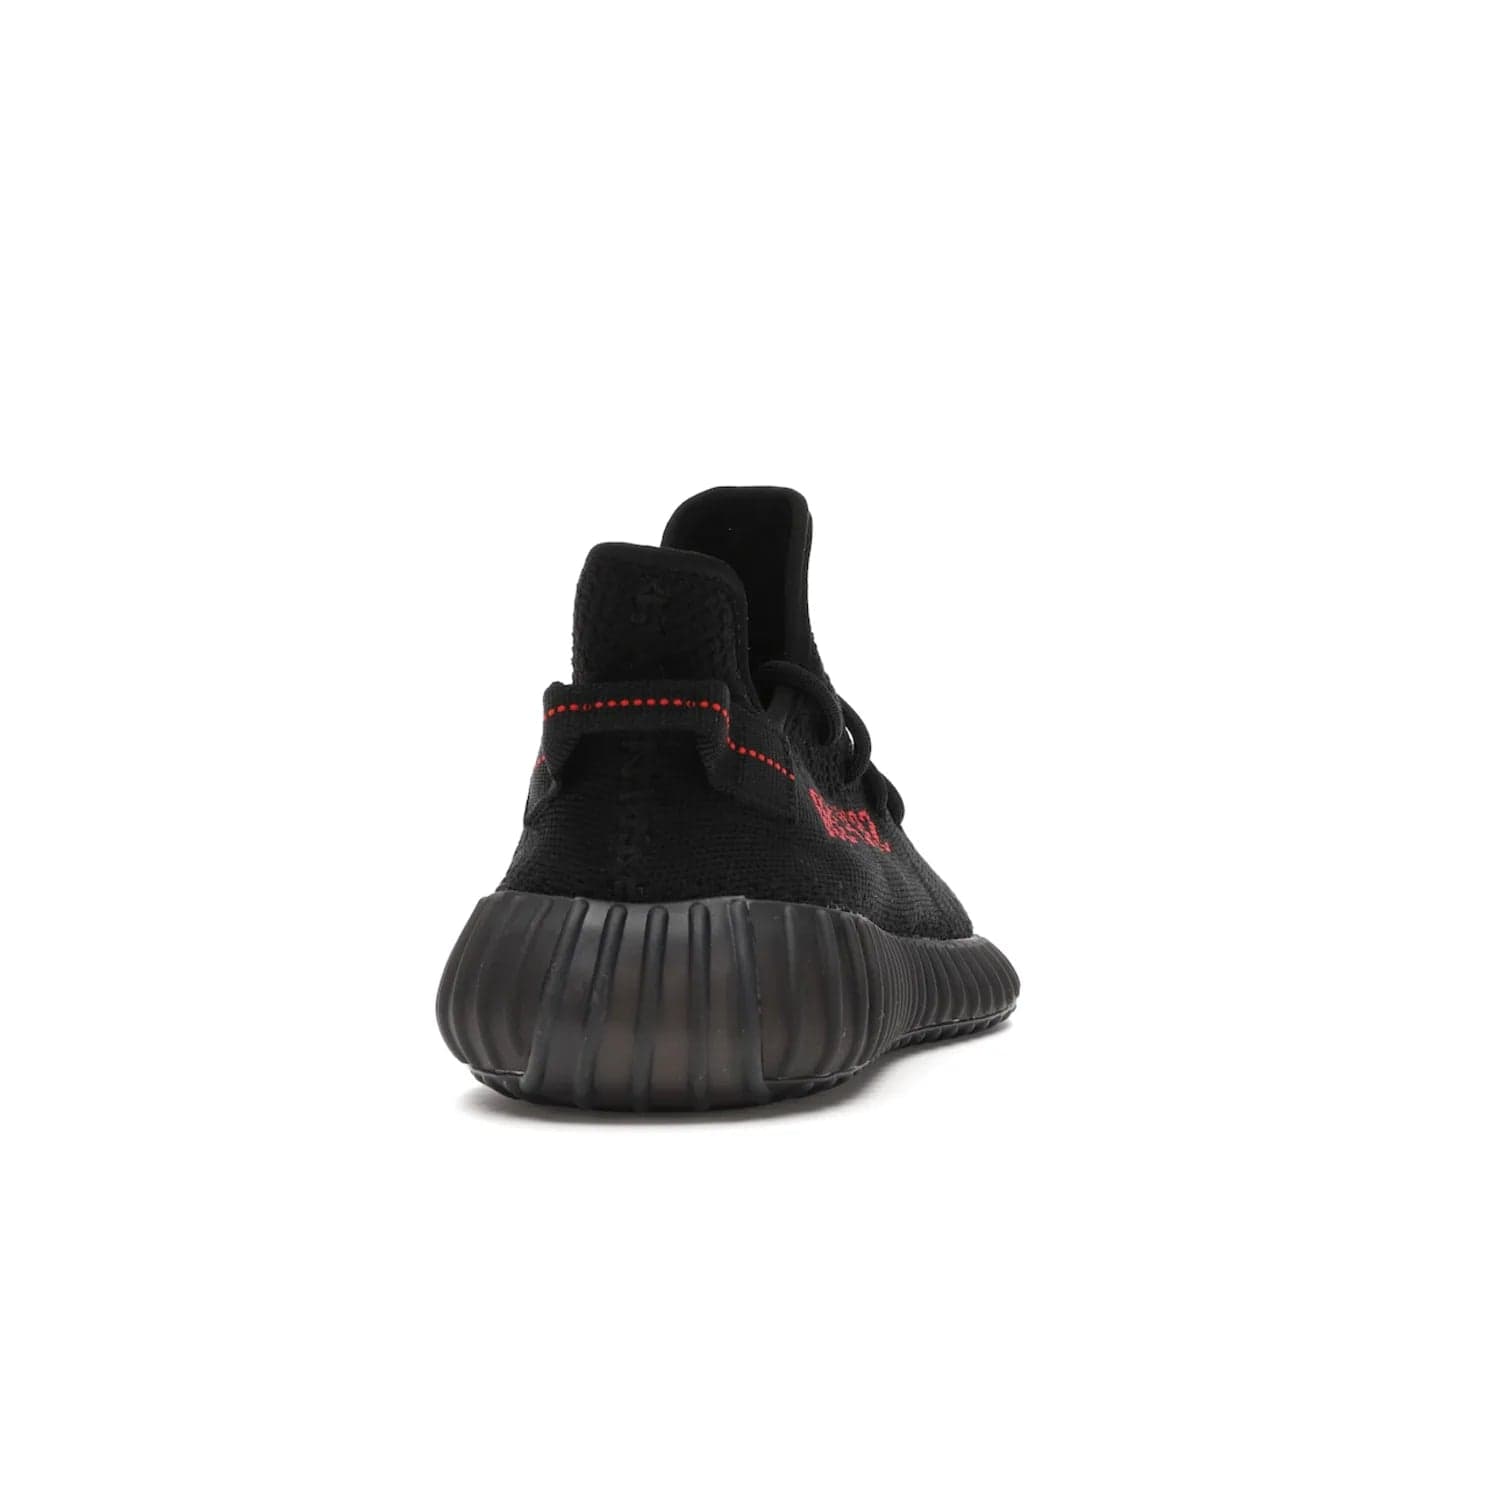 adidas Yeezy Boost 350 V2 Black Red (2017/2020) - Image 29 - Only at www.BallersClubKickz.com - Adidas Yeezy Boost 350 V2 Black Red: a classic colorway featuring black Primeknit upper, BOOST cushioning system, and iconic "SPLY-350" text. Released in 2017 for a retail price of $220.